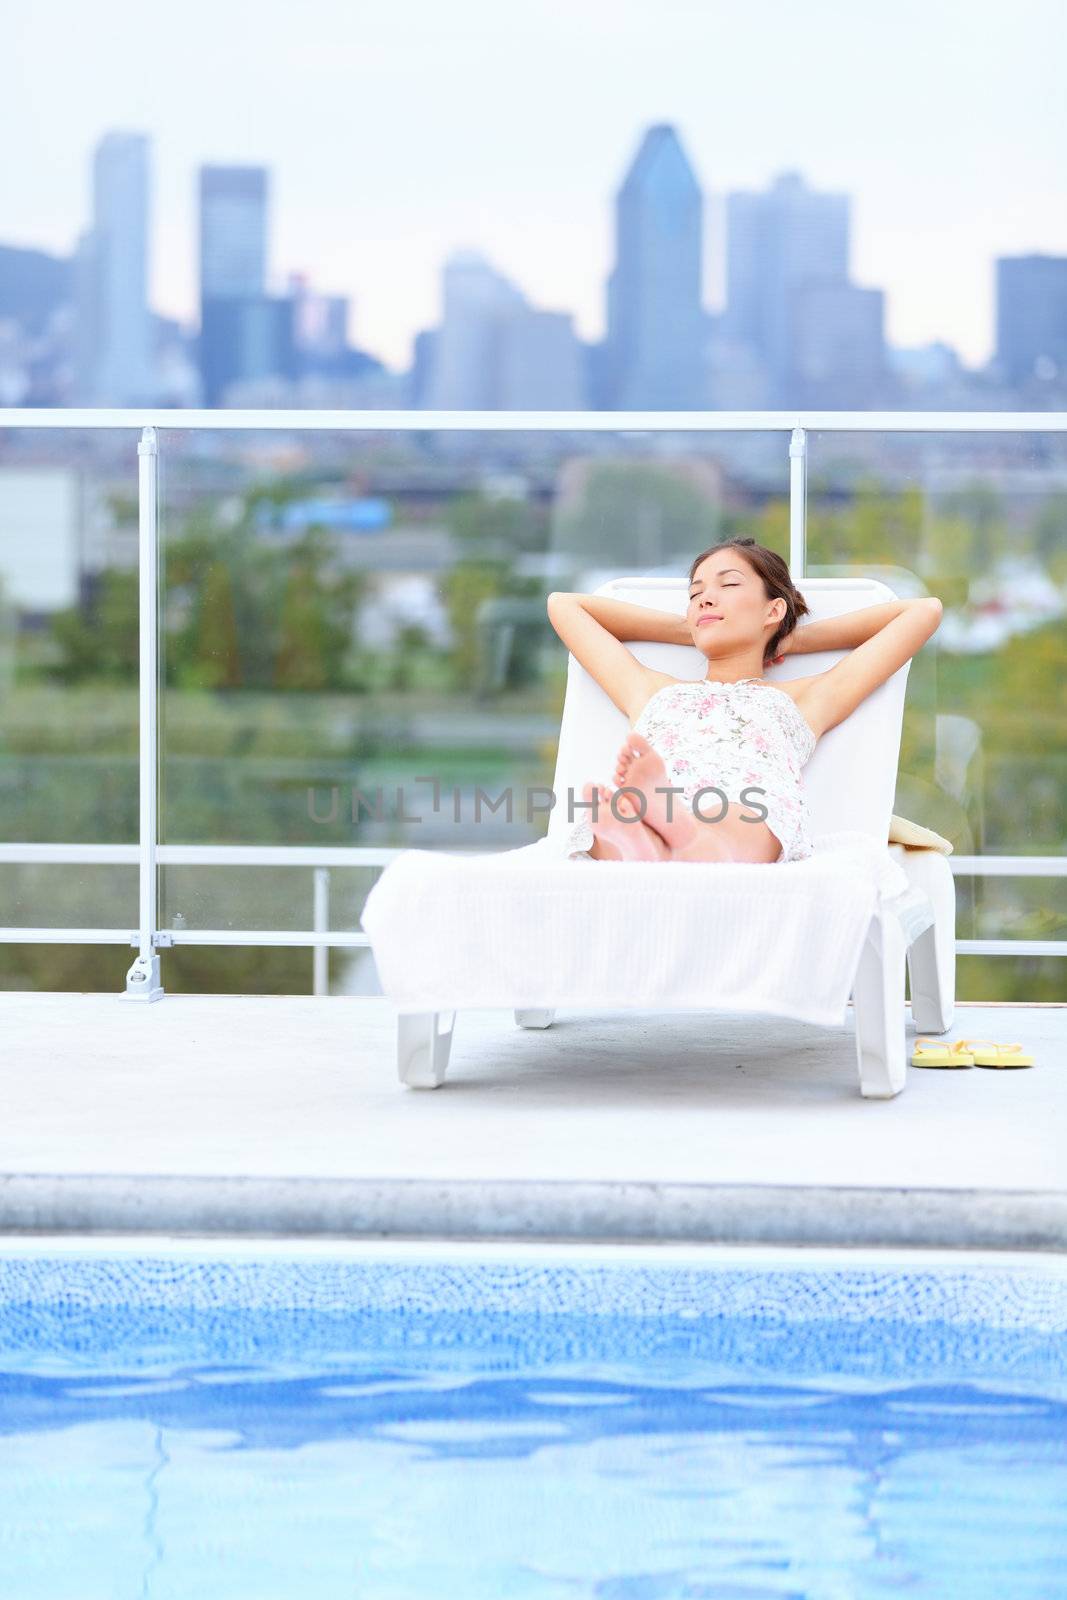 Woman relaxing at rooftop pool in city with skyline in background. Young female model lying down at sun lounger with Montreal skyline in background.